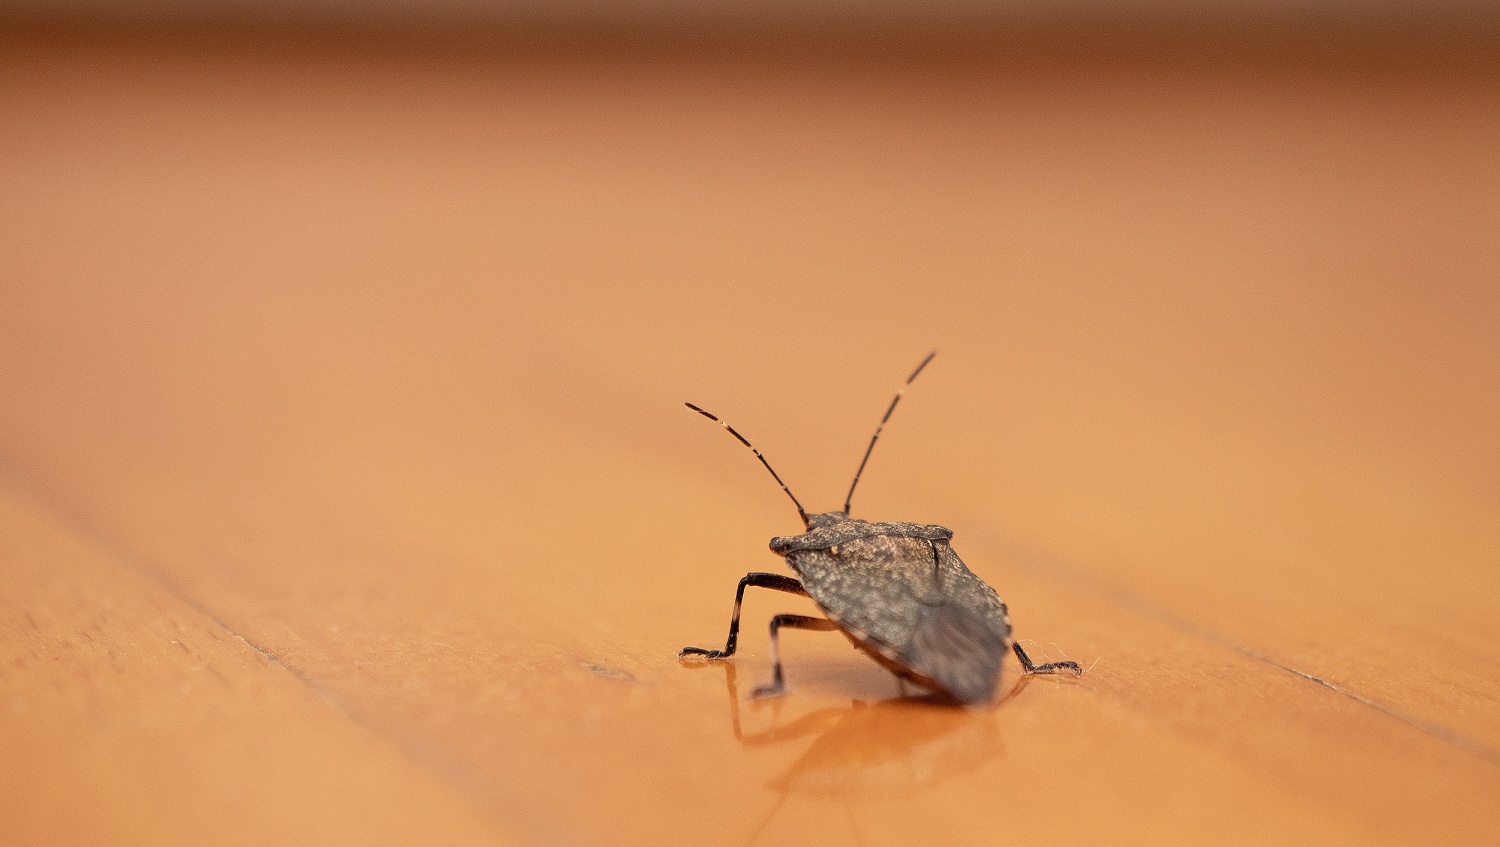 How to Get Rid of Stink Bugs, According to an Entomologist